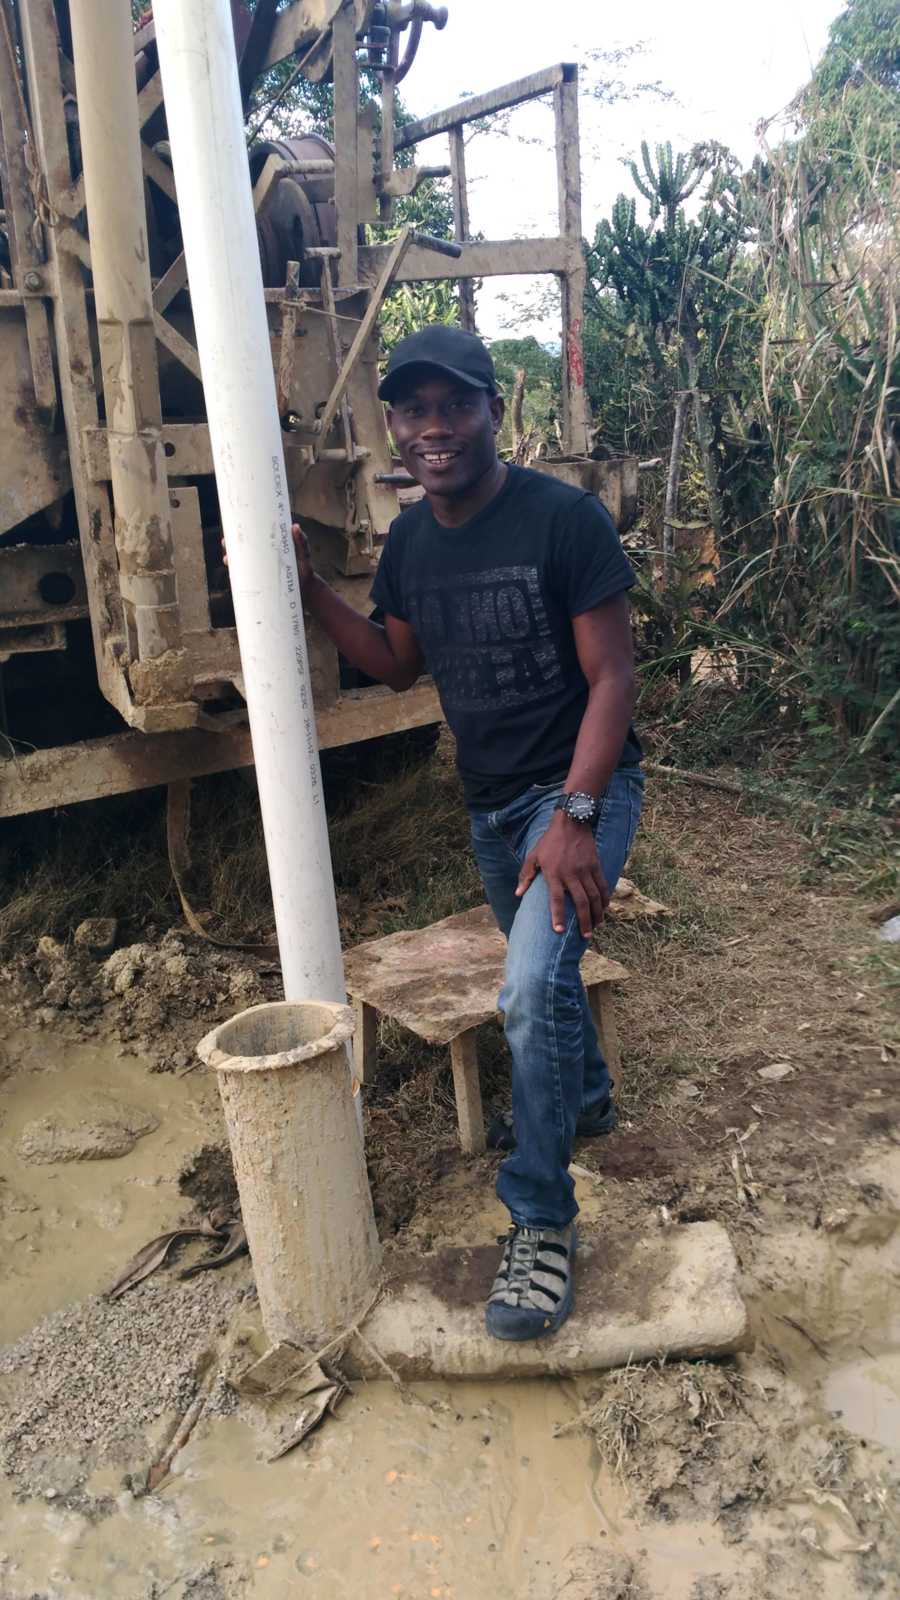 Man who fosters 62 children in Haiti stands in muddy area holding onto large PVC pipe